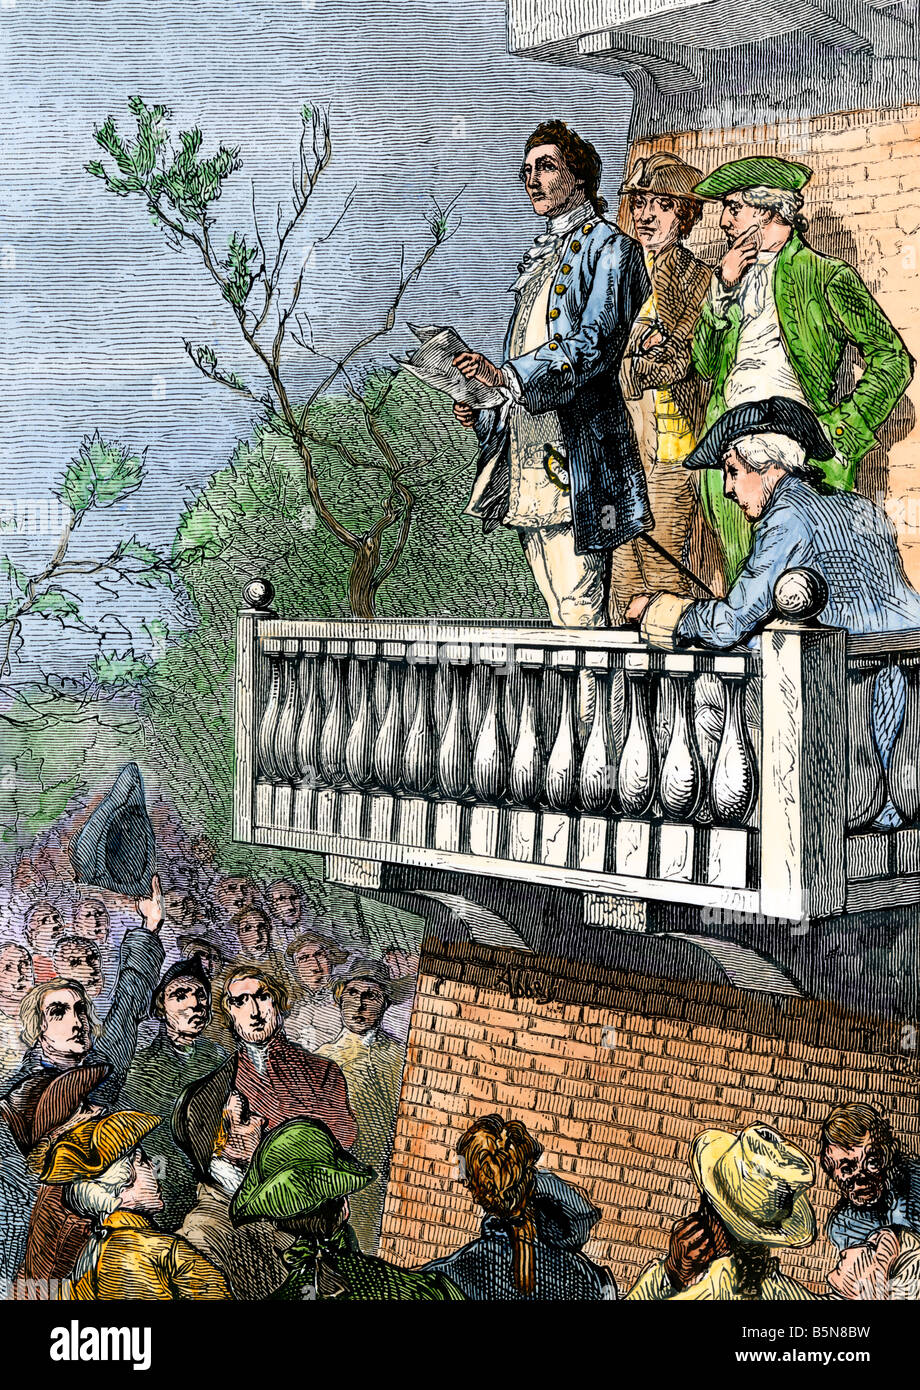 John Nixon reading the Declaration of Independence in Philadelphia July 8 1776. Hand-colored woodcut Stock Photo